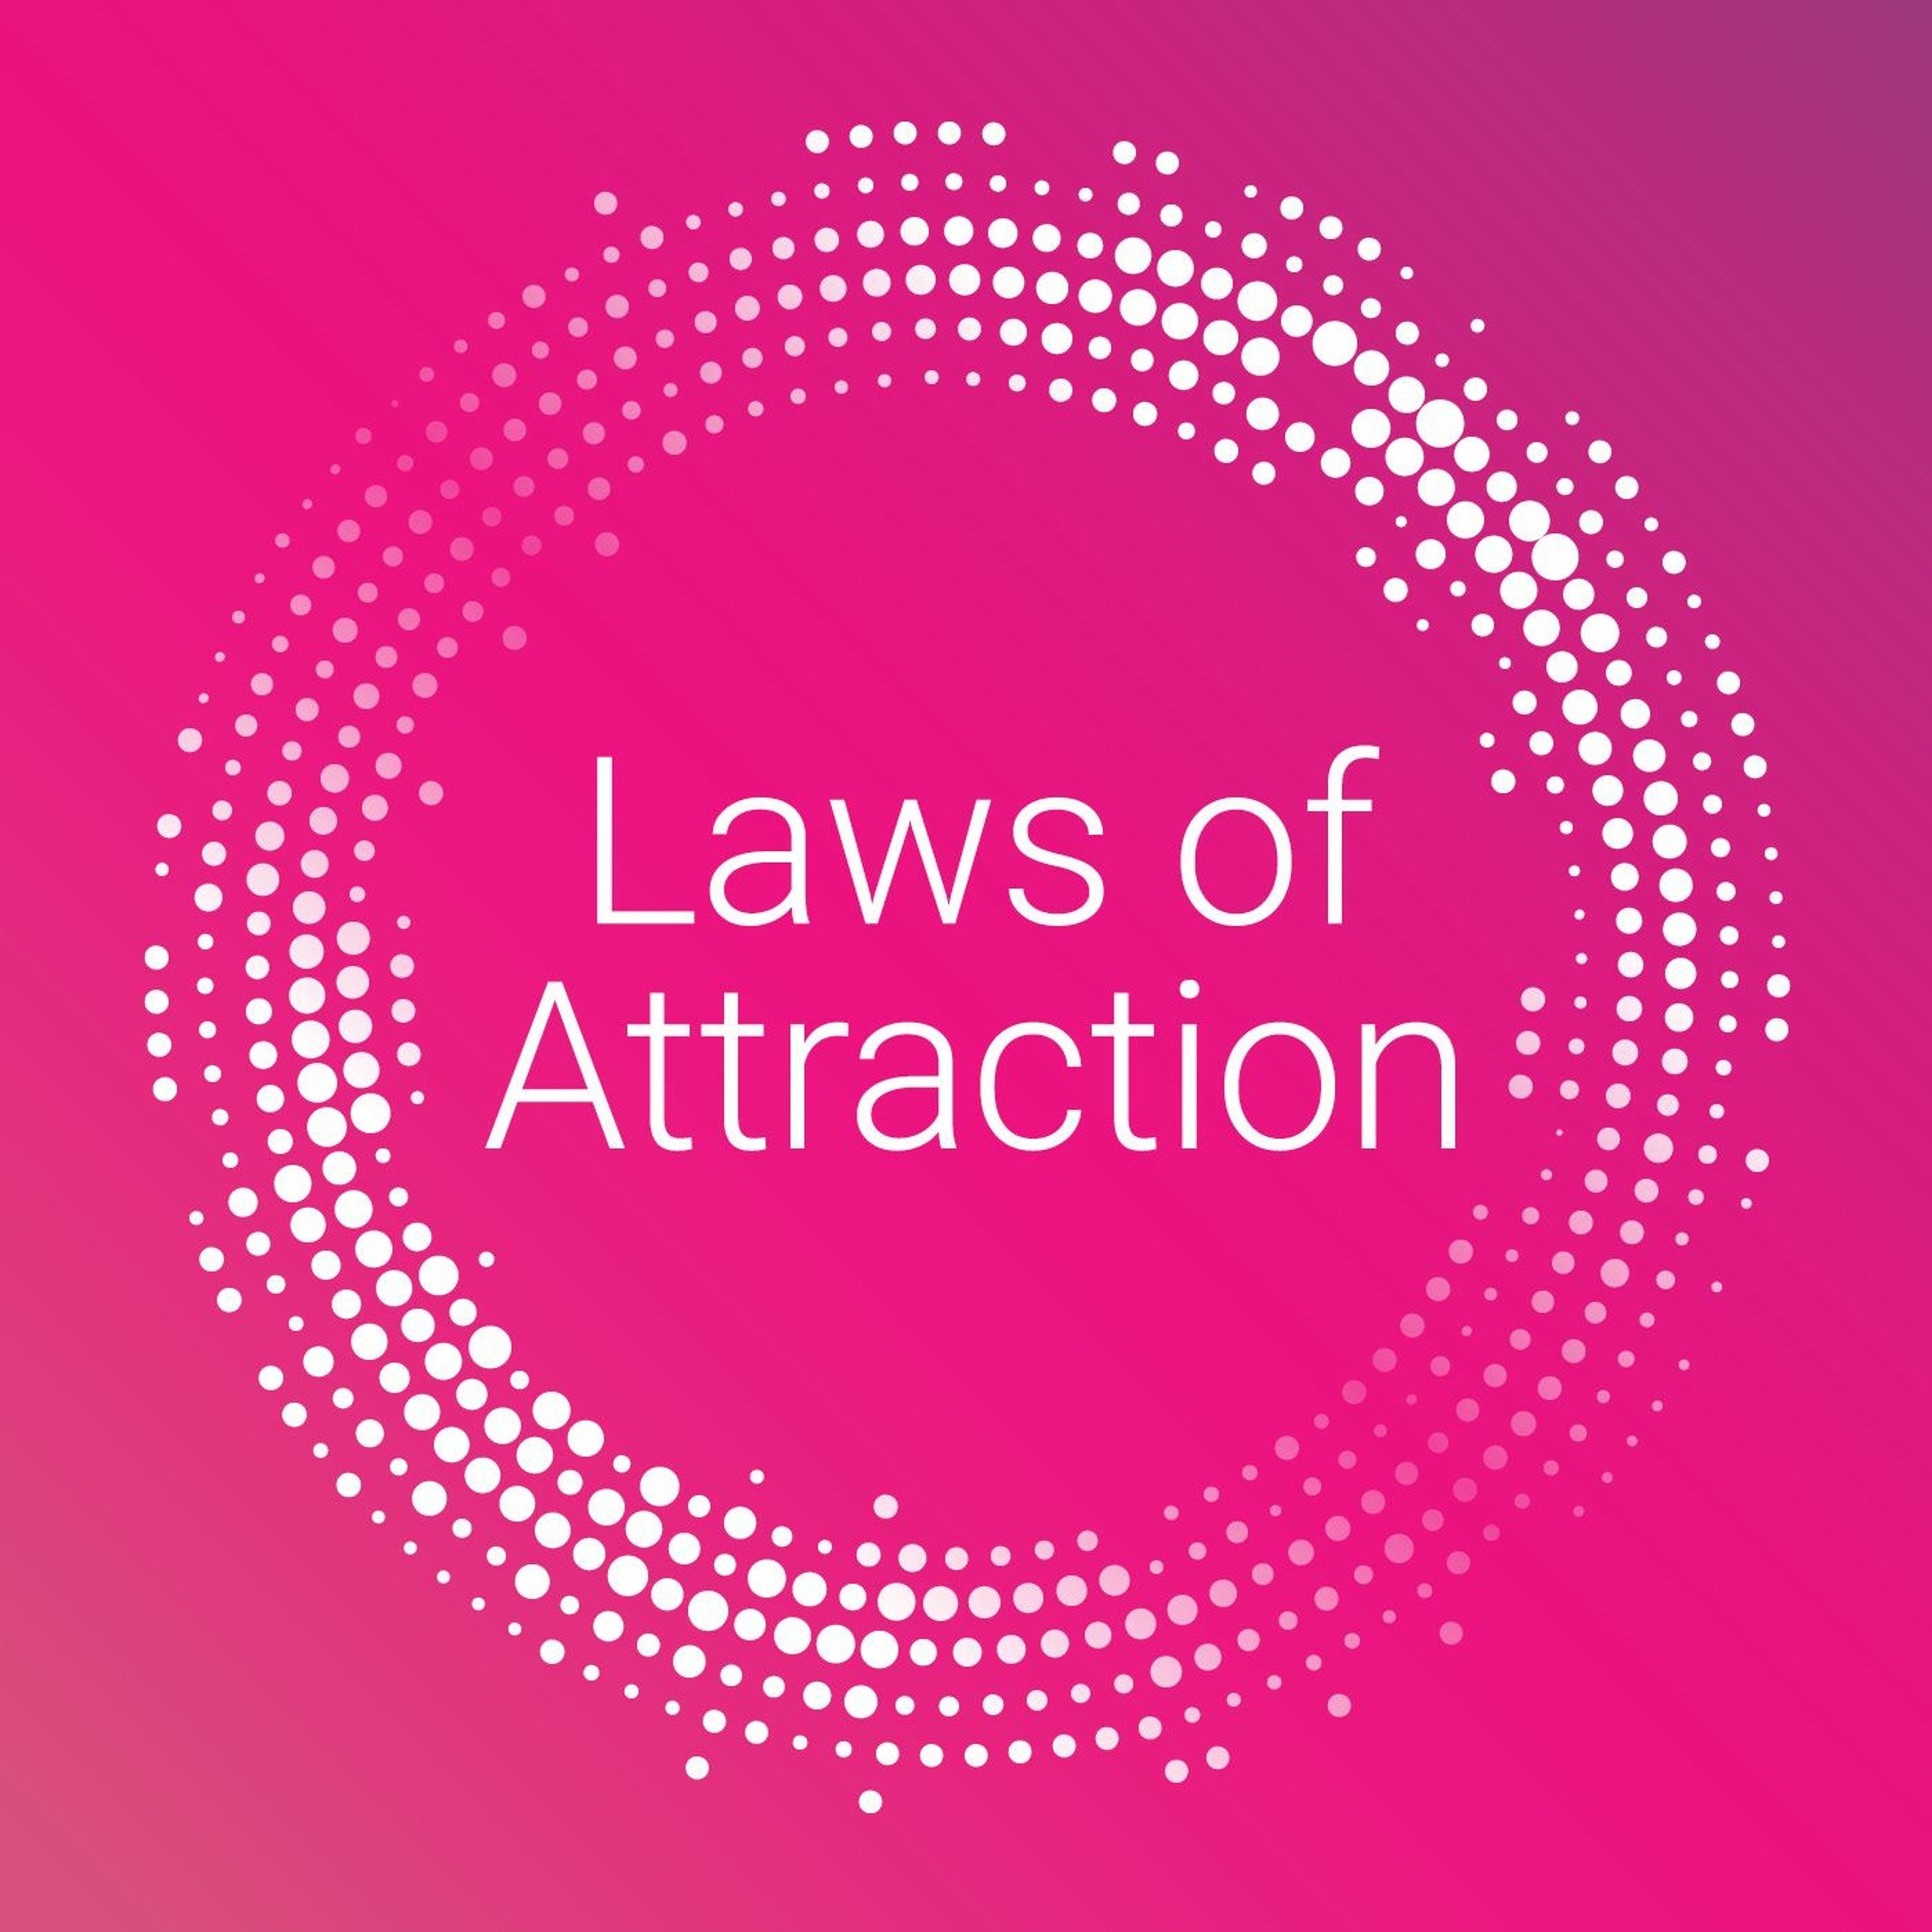 Laws of Attraction - What men want in the workplace